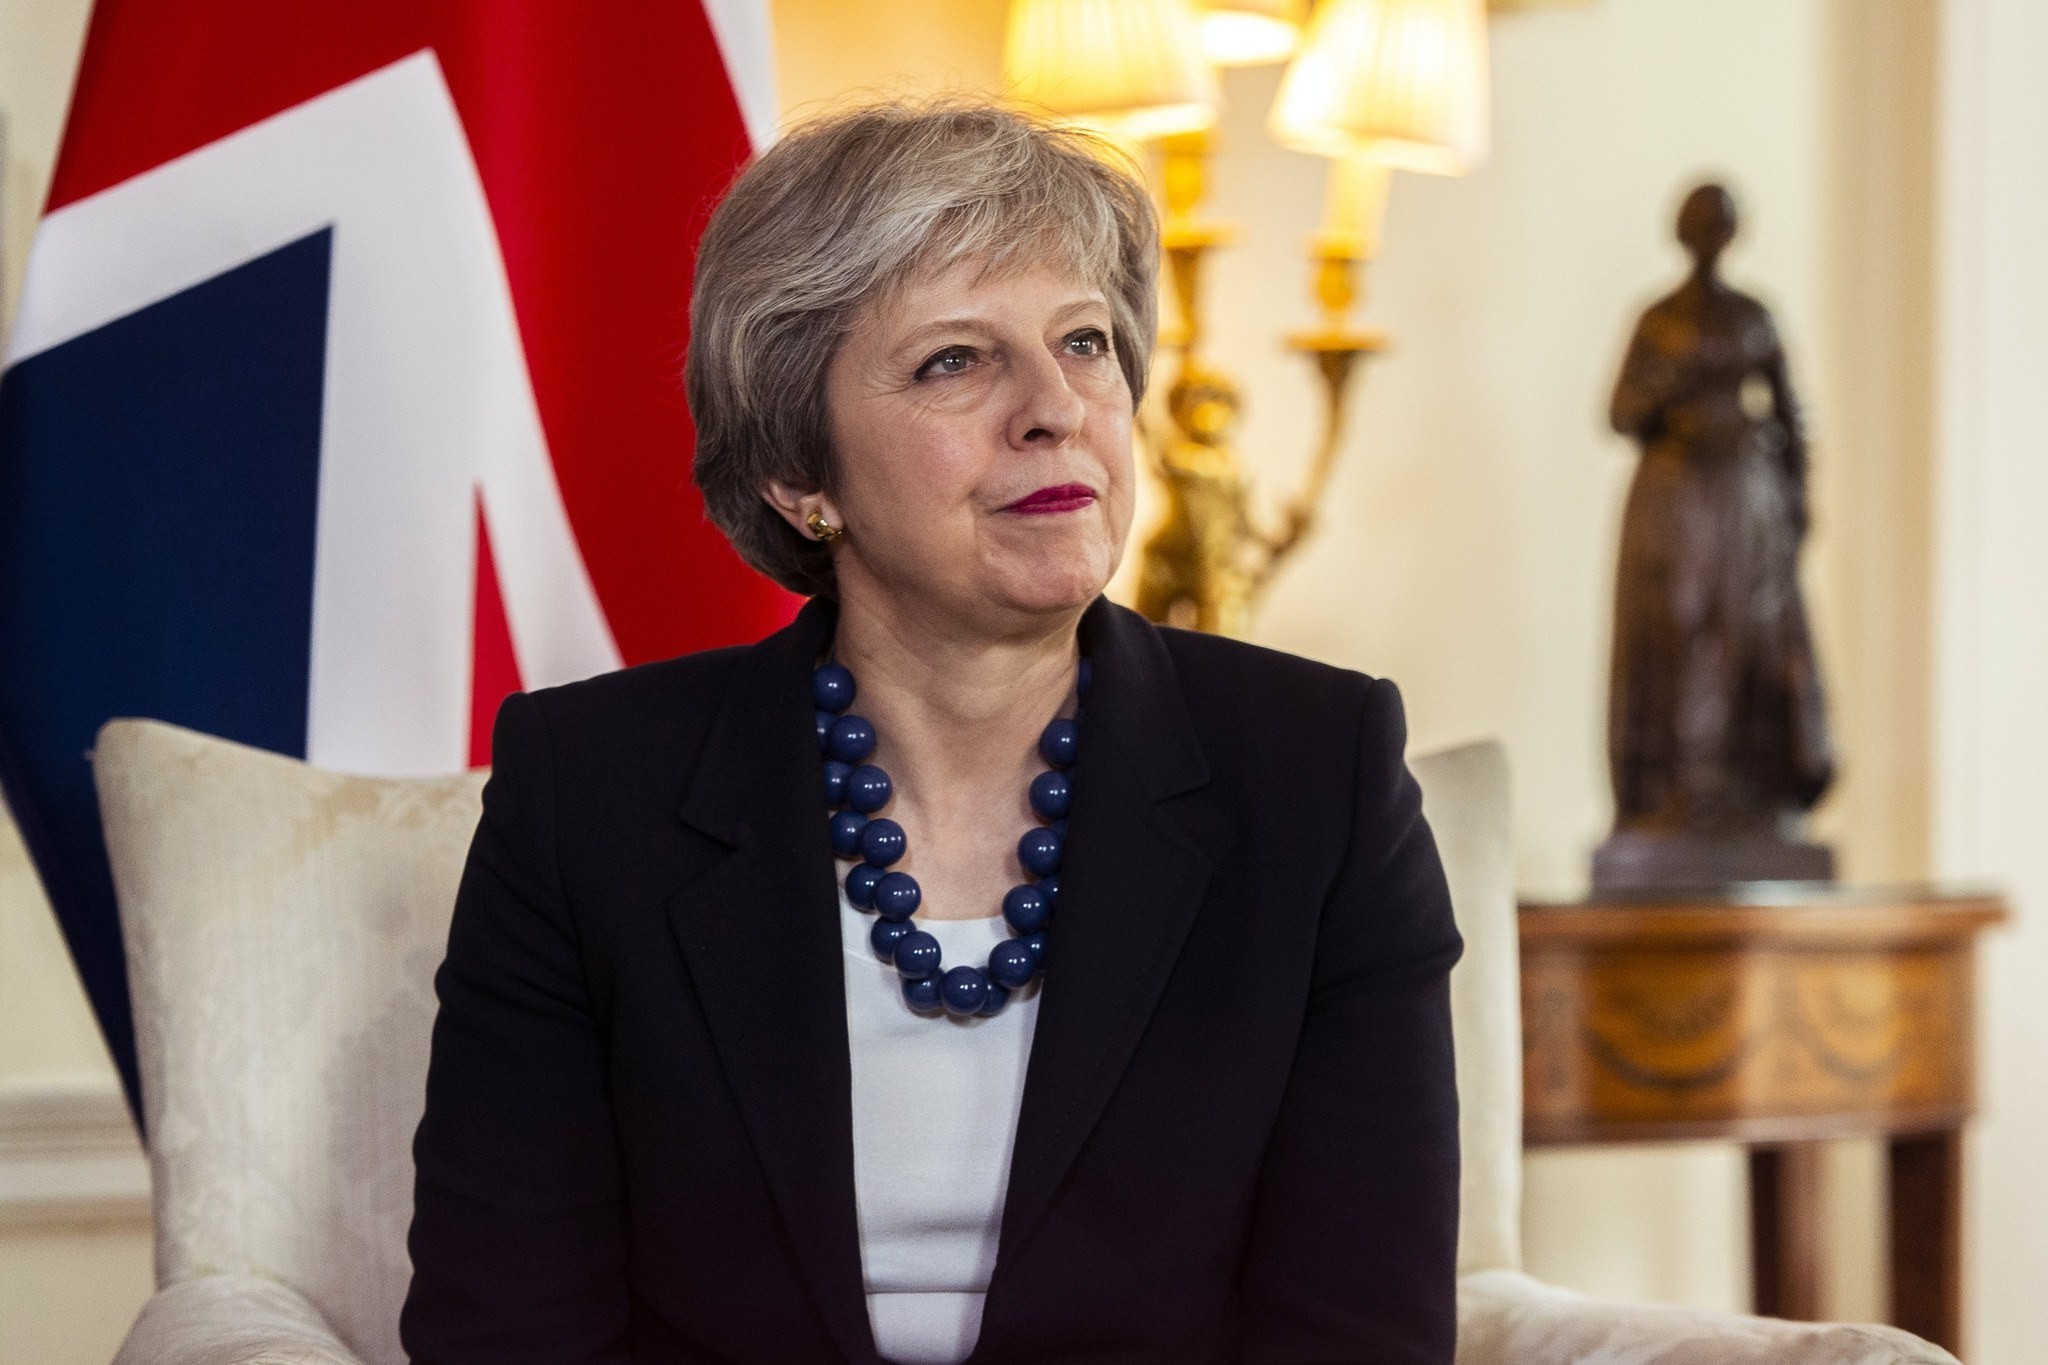 British Prime Minister Theresa May during talks with Prime Minister of Portugal Antonio Costa (unseen) at 10 Downing Street in London, Britain, 10 April 2018. (EPA Photo)